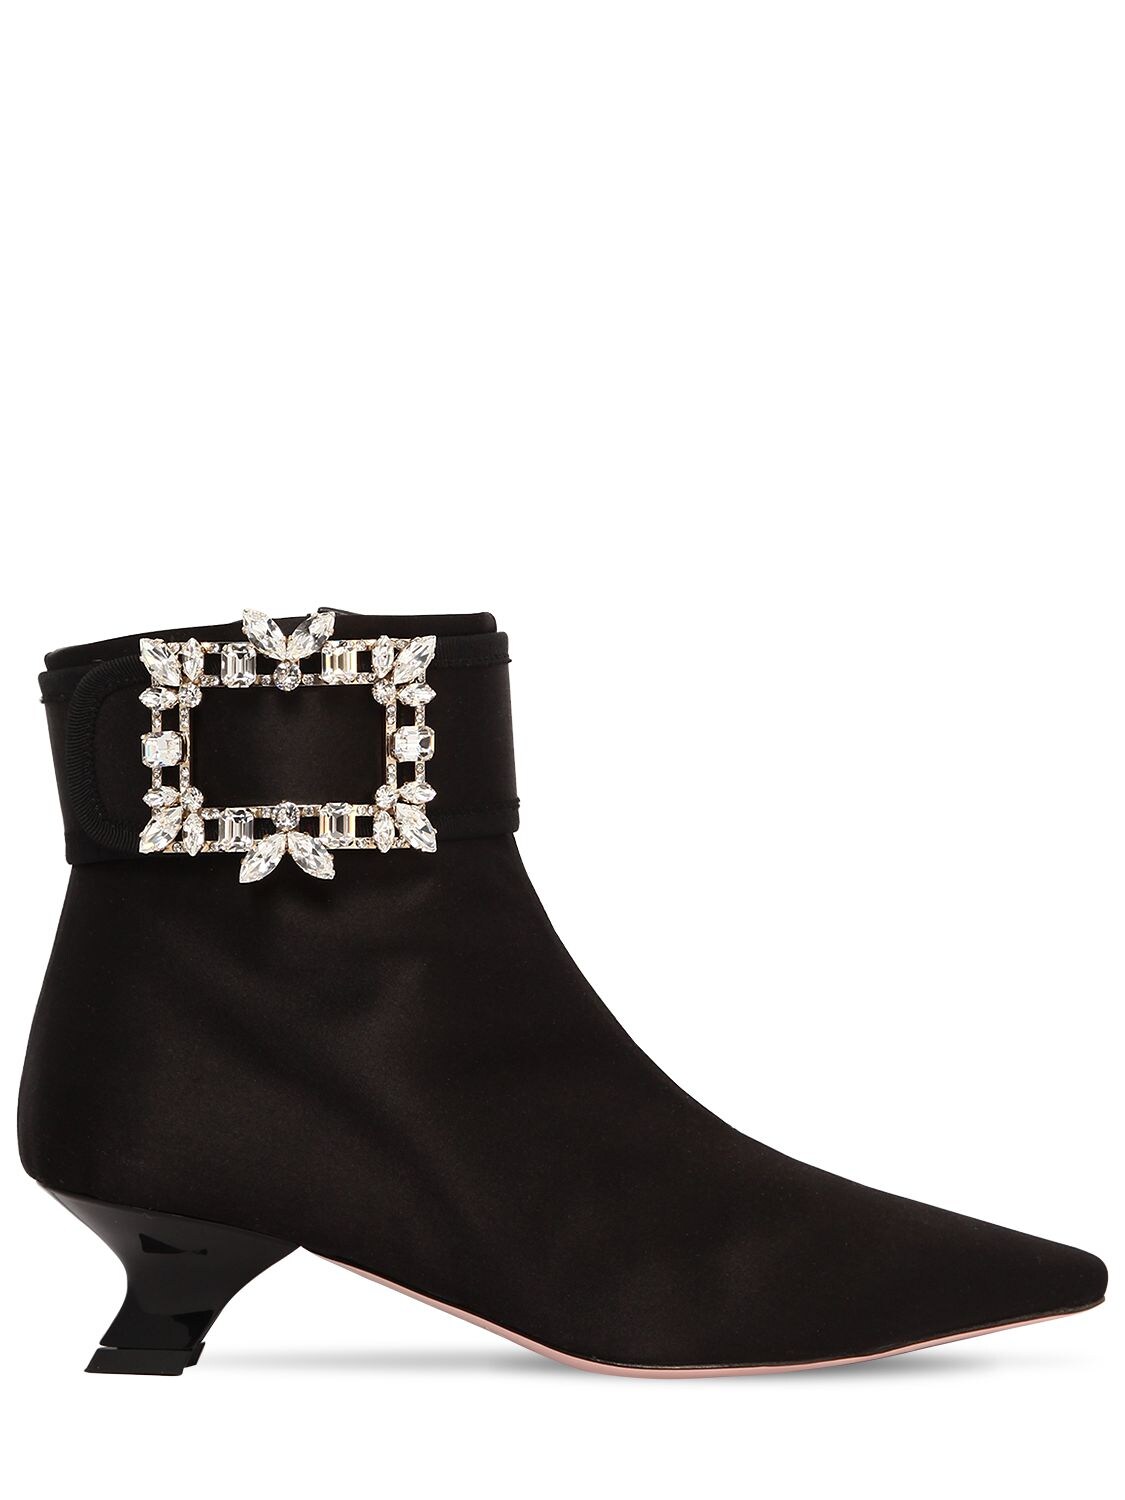 Roger Vivier 45mm Trianon Crystal Buckle Satin Boots In Black